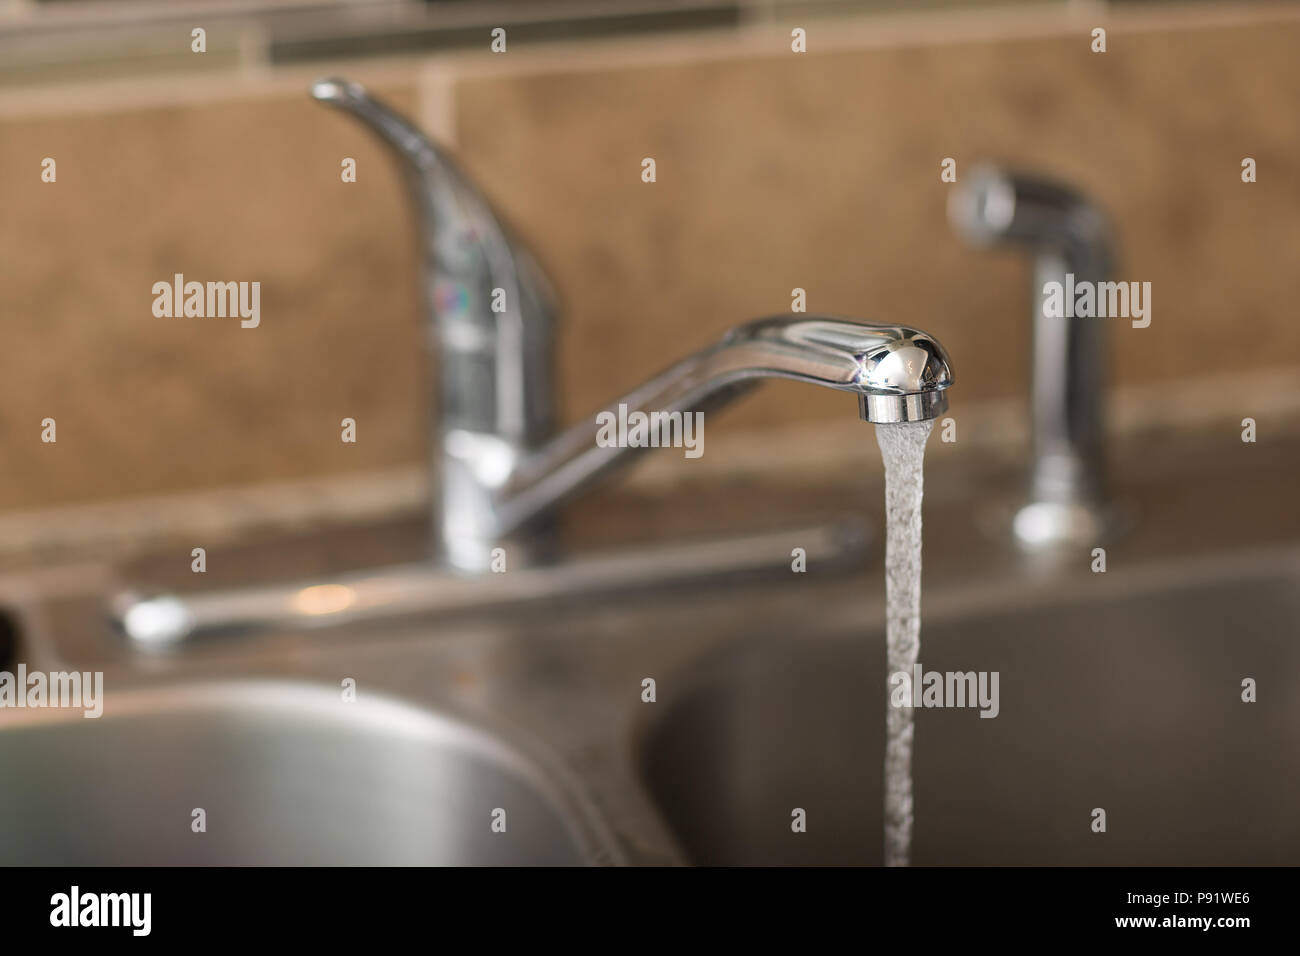 Water Coming Out Of A Faucet View Is A 3 4 View With Shallow